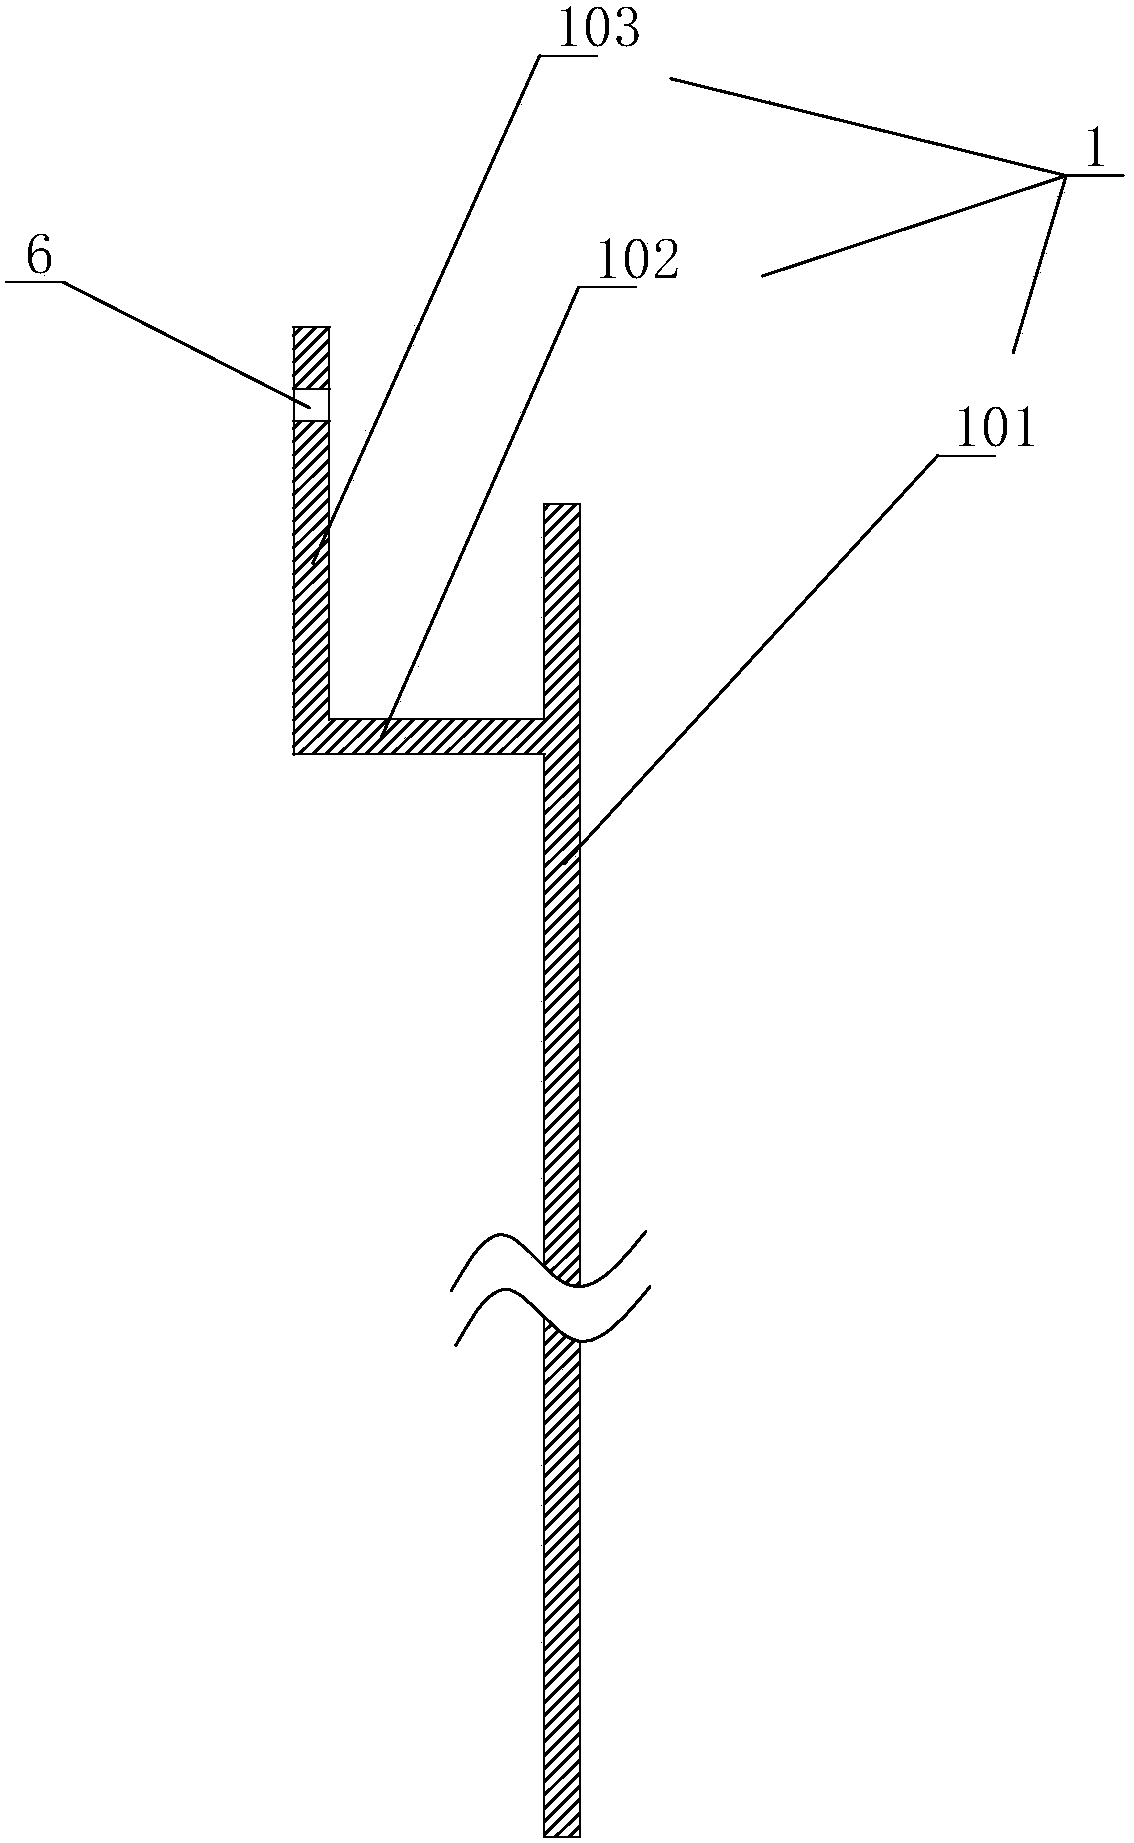 Construction method of an external wall thermal insulation system